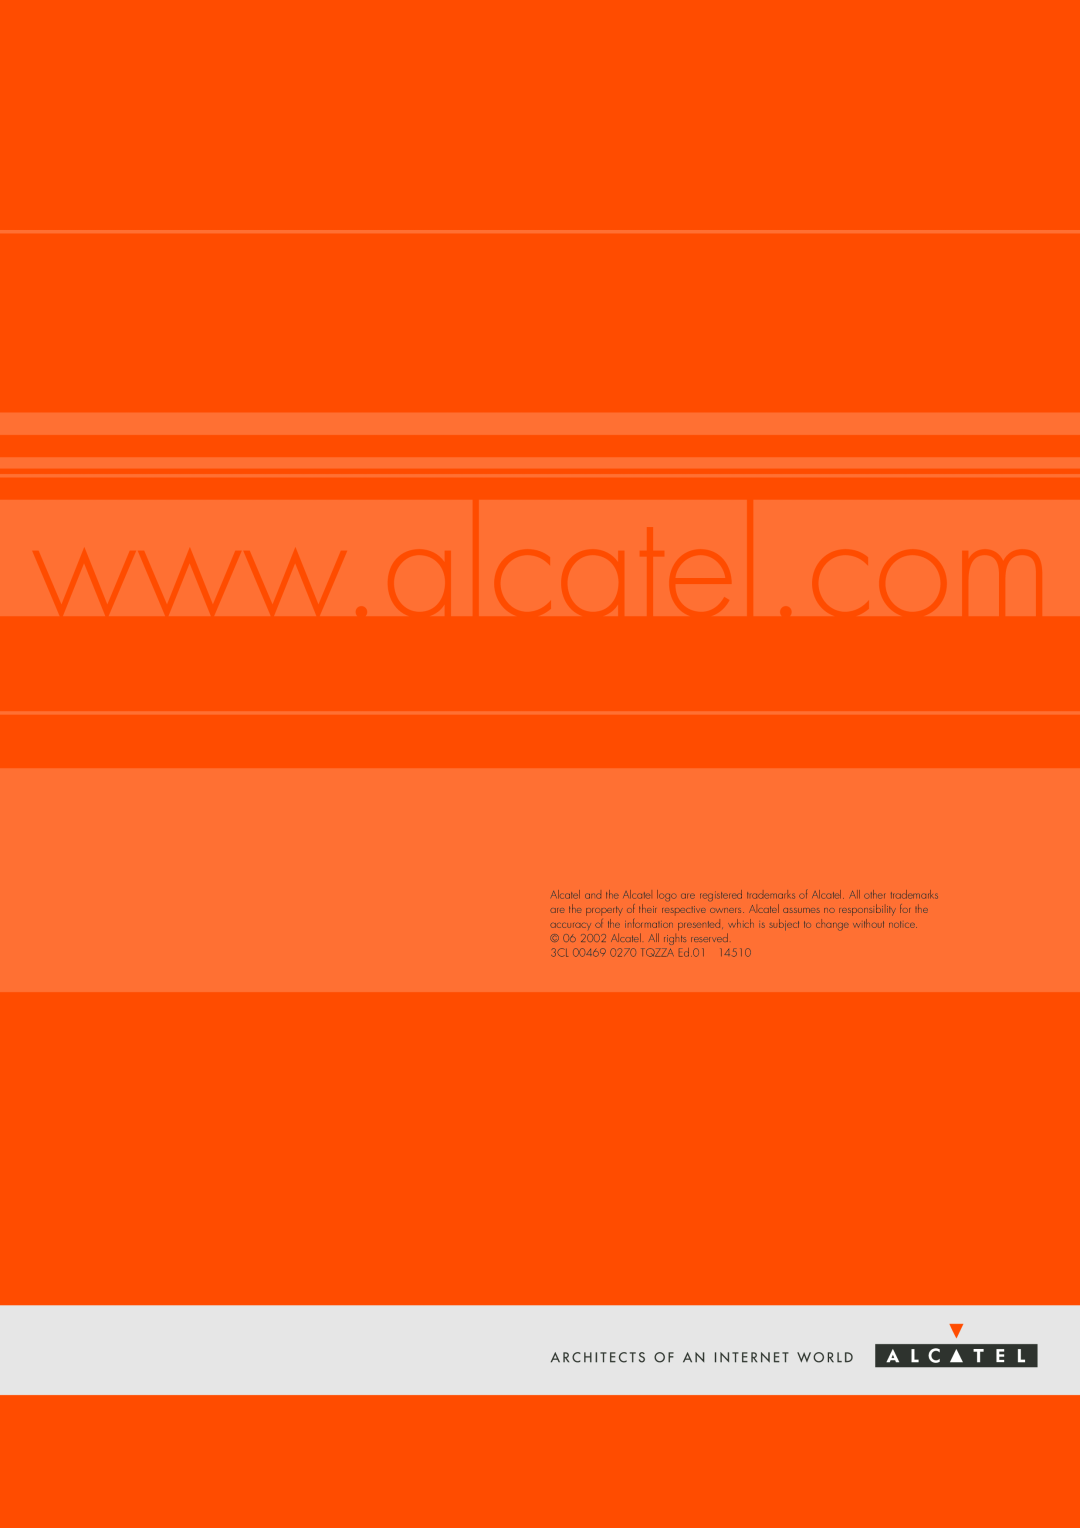 Alcatel Carrier Internetworking Solutions 3600 manual 06 2002 Alcatel. All rights reserved. 3CL 00469 0270 TQZZA Ed.01 